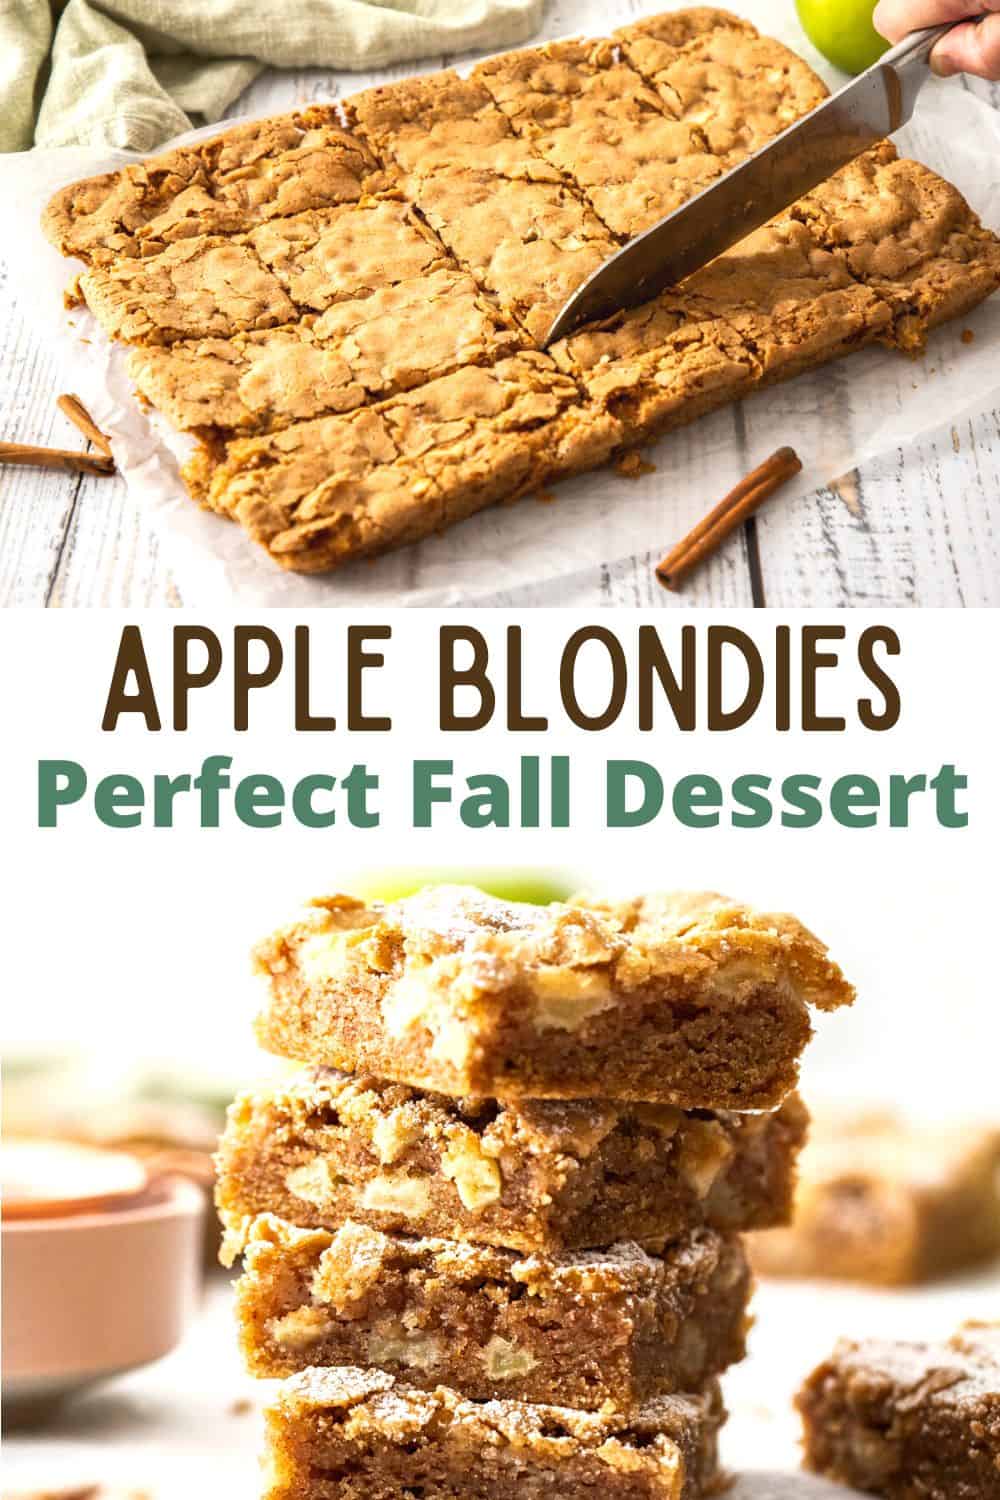 This apple blondies recipe is the perfect fall dessert with an easy batter you can whip up in minutes! These apple bars are made with fresh chopped apples and warm flavors of cinnamon and sugar.